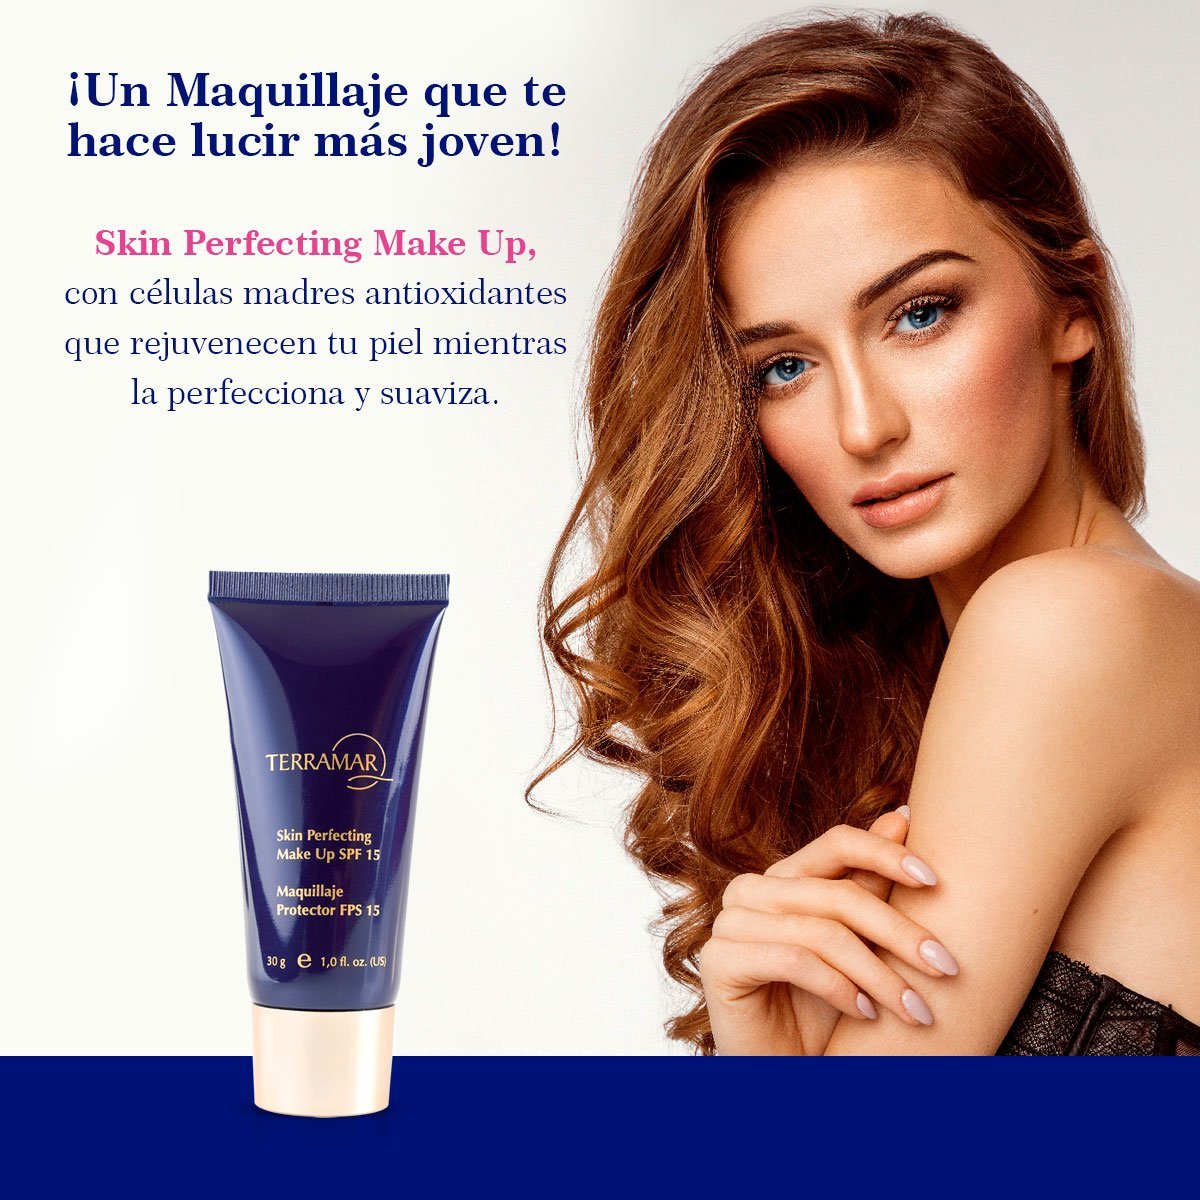 Maquillaje protector tips